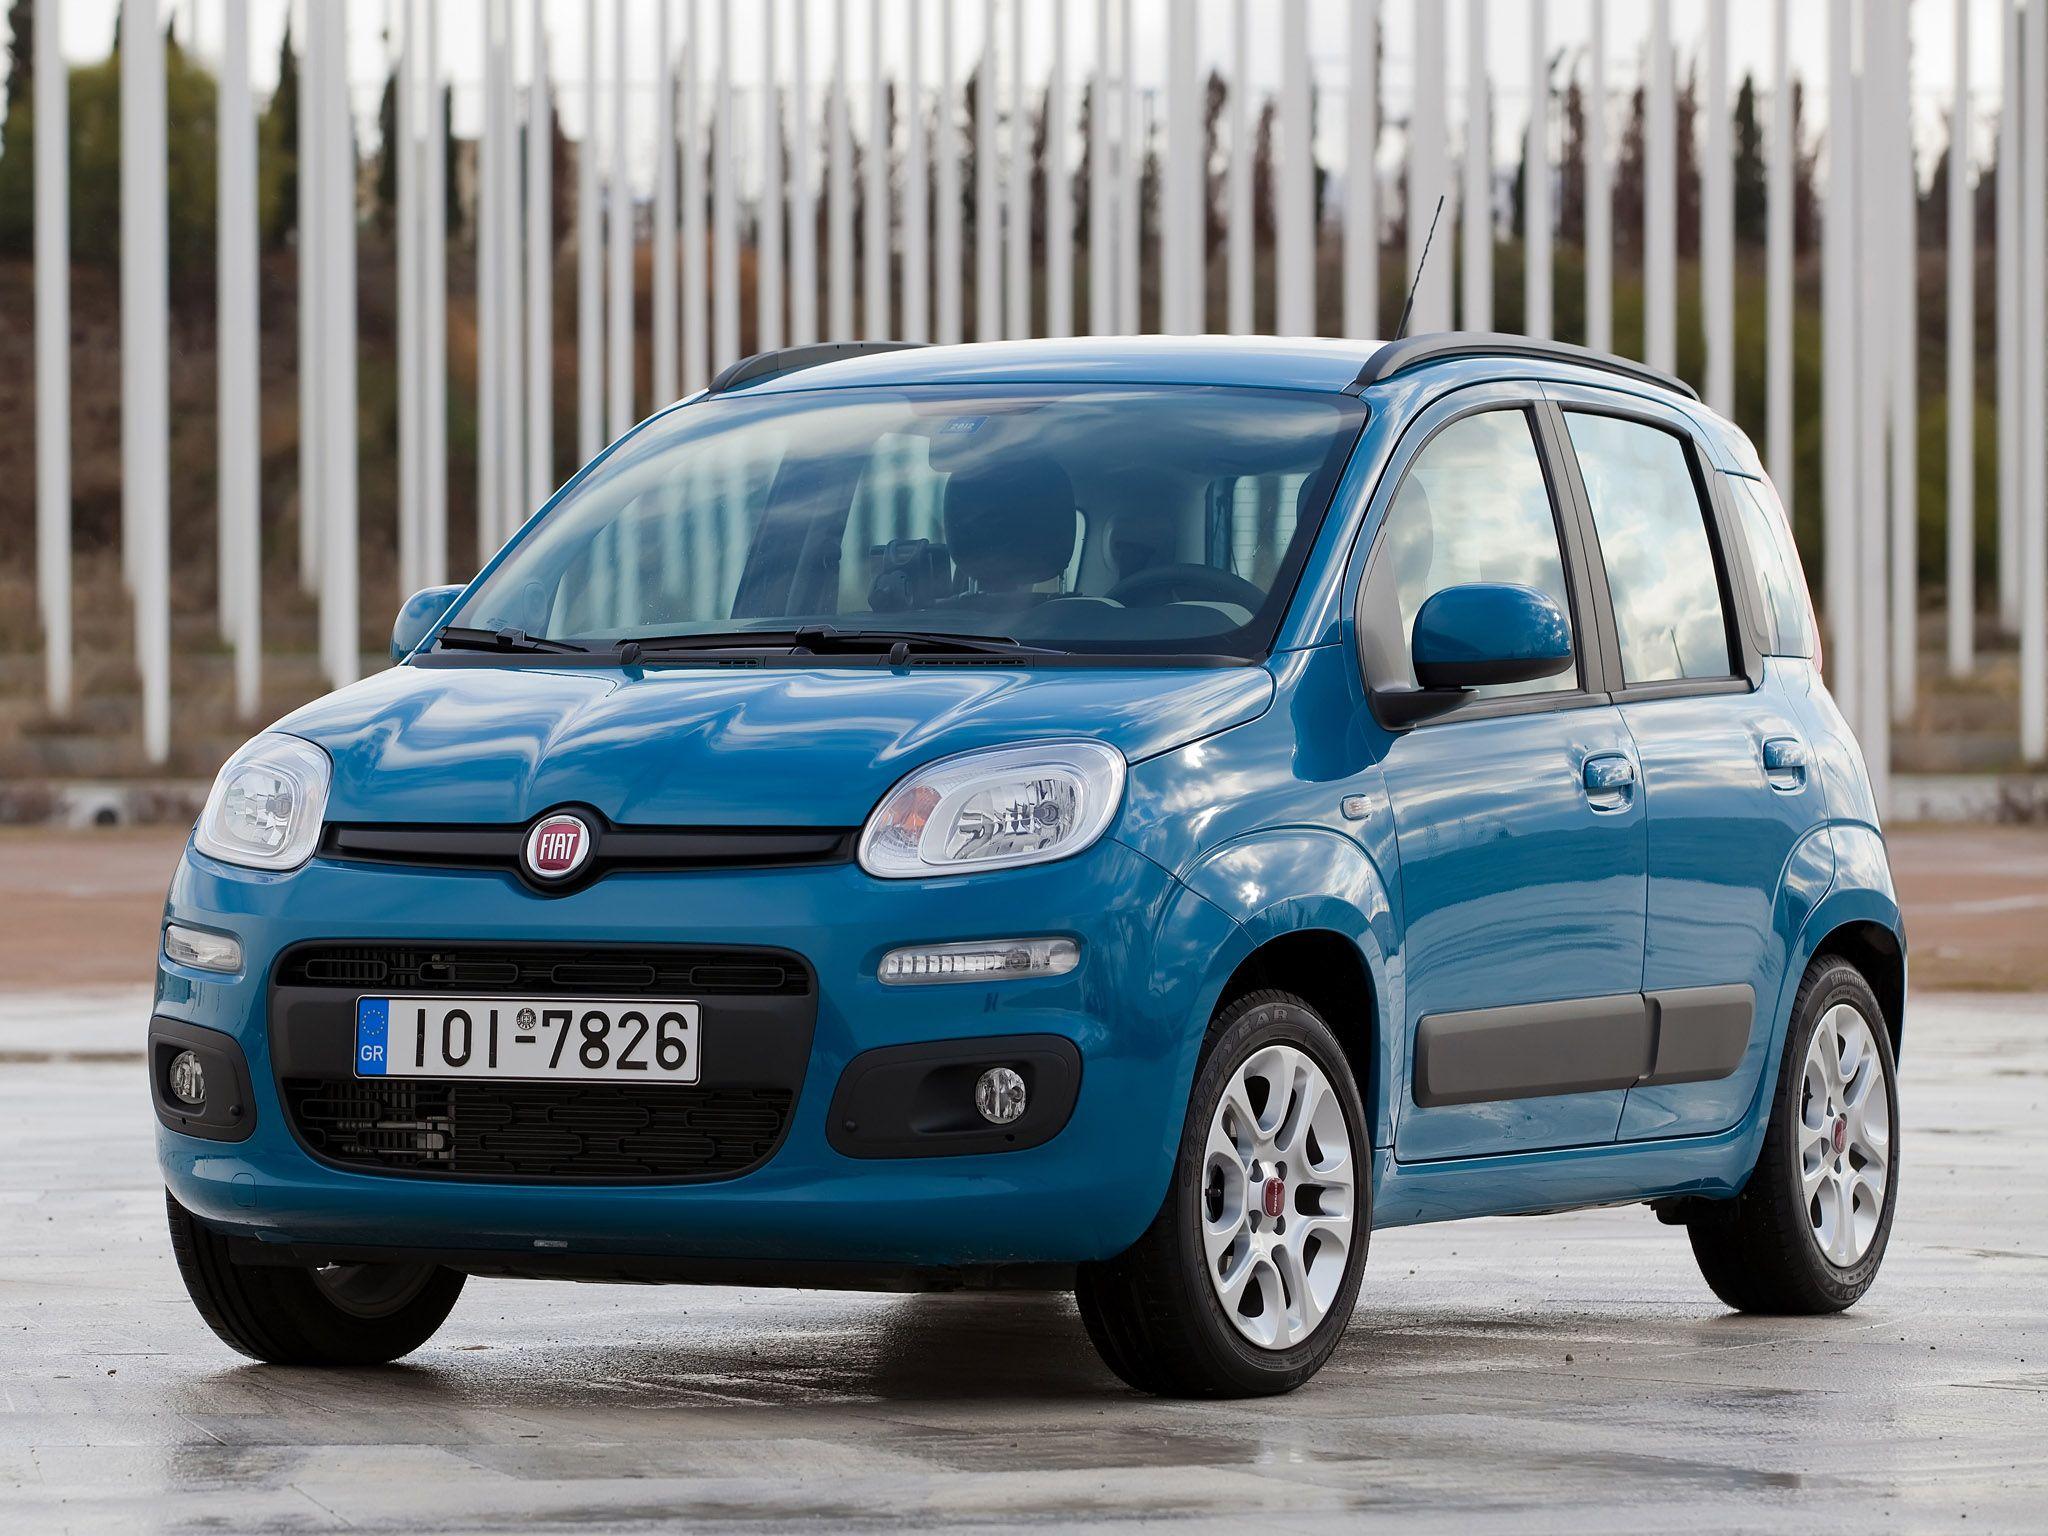 Fiat Panda Review, Amazing Pictures and Wallpaper – Look at the car